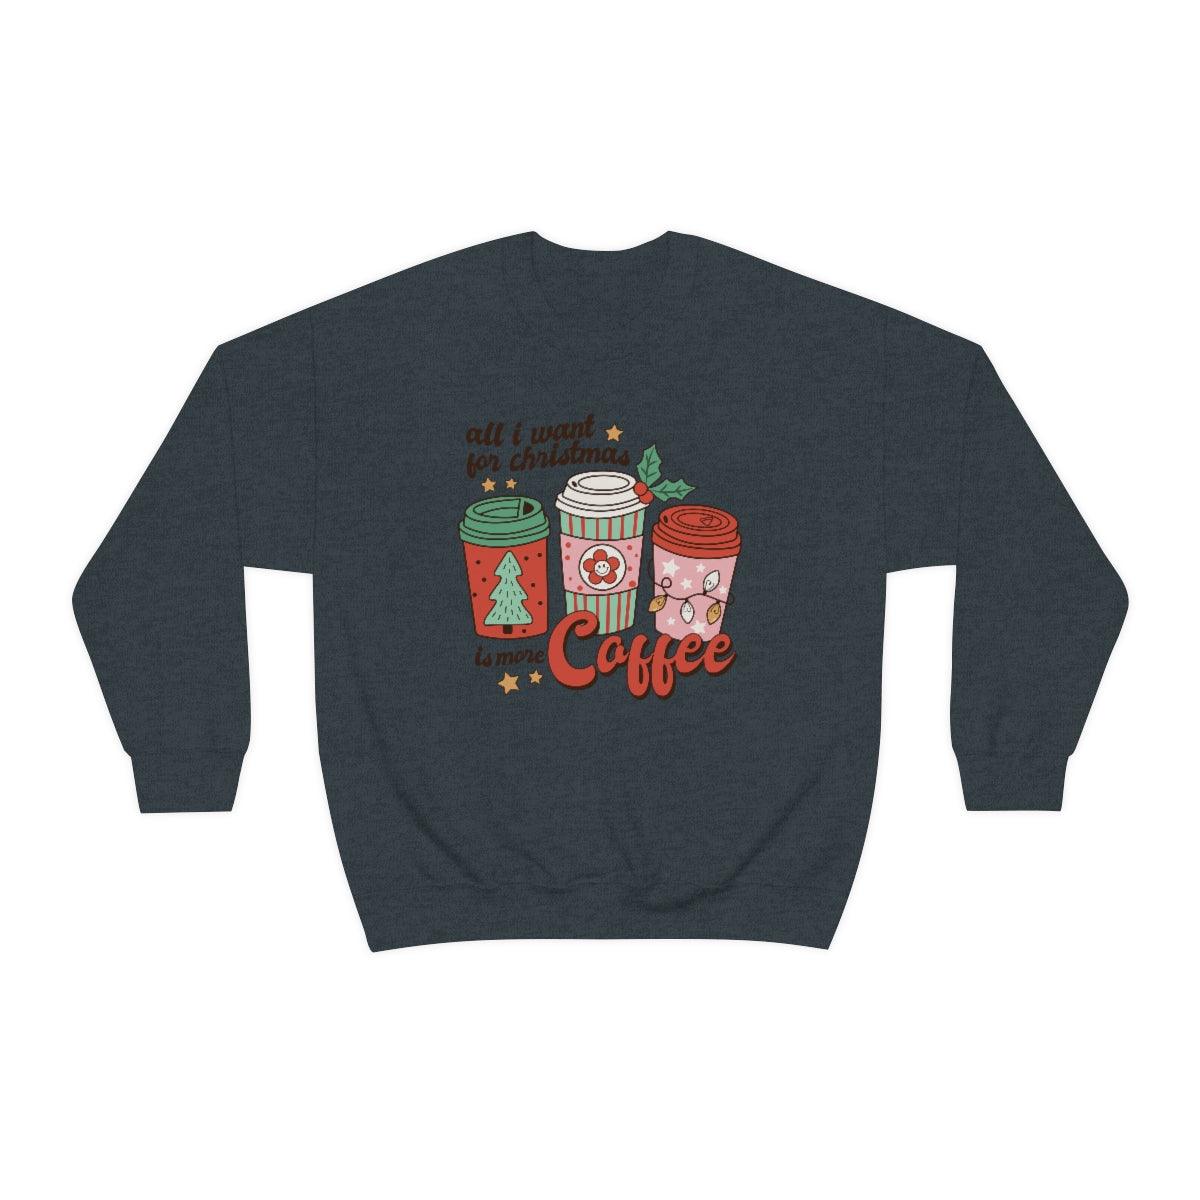 All I want For Christmas Is More Coffee Christmas Crewneck Sweater